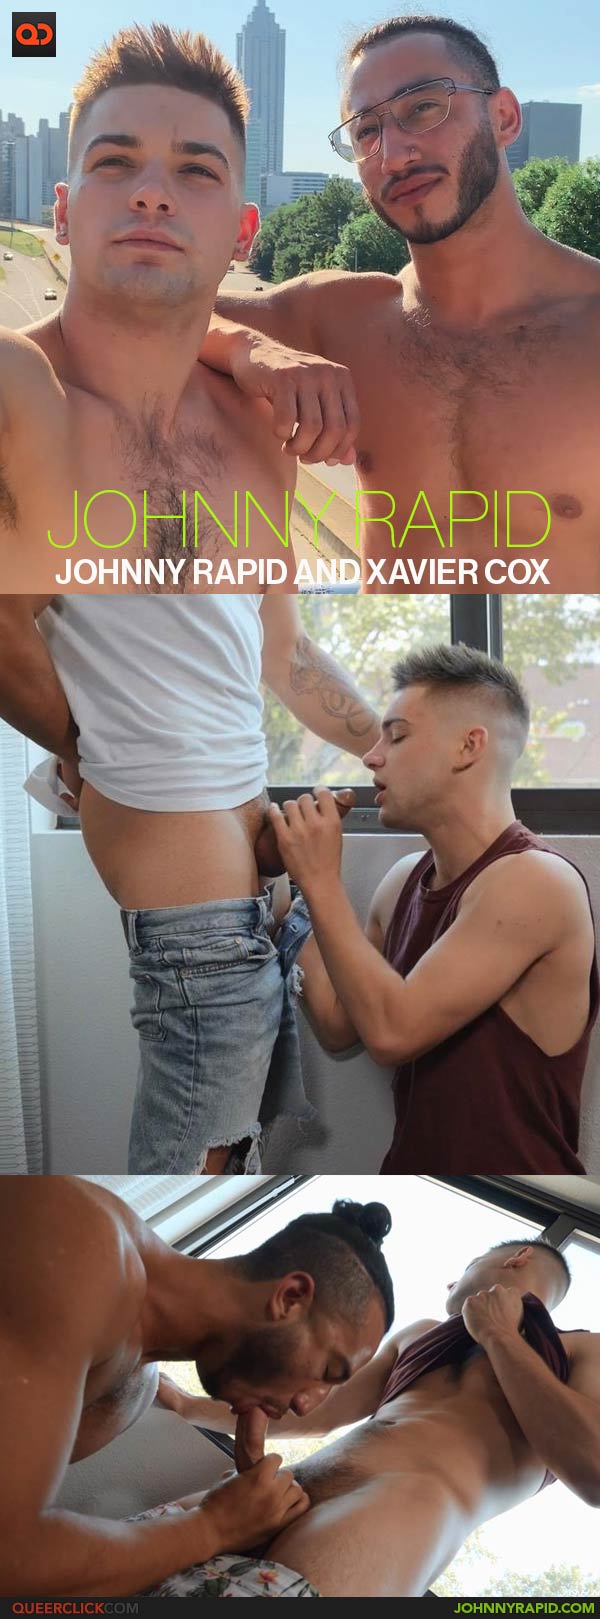 Johnny Rapid: Clap those Cheeks, Johnny! - Johnny Rapid and Xavier Cox